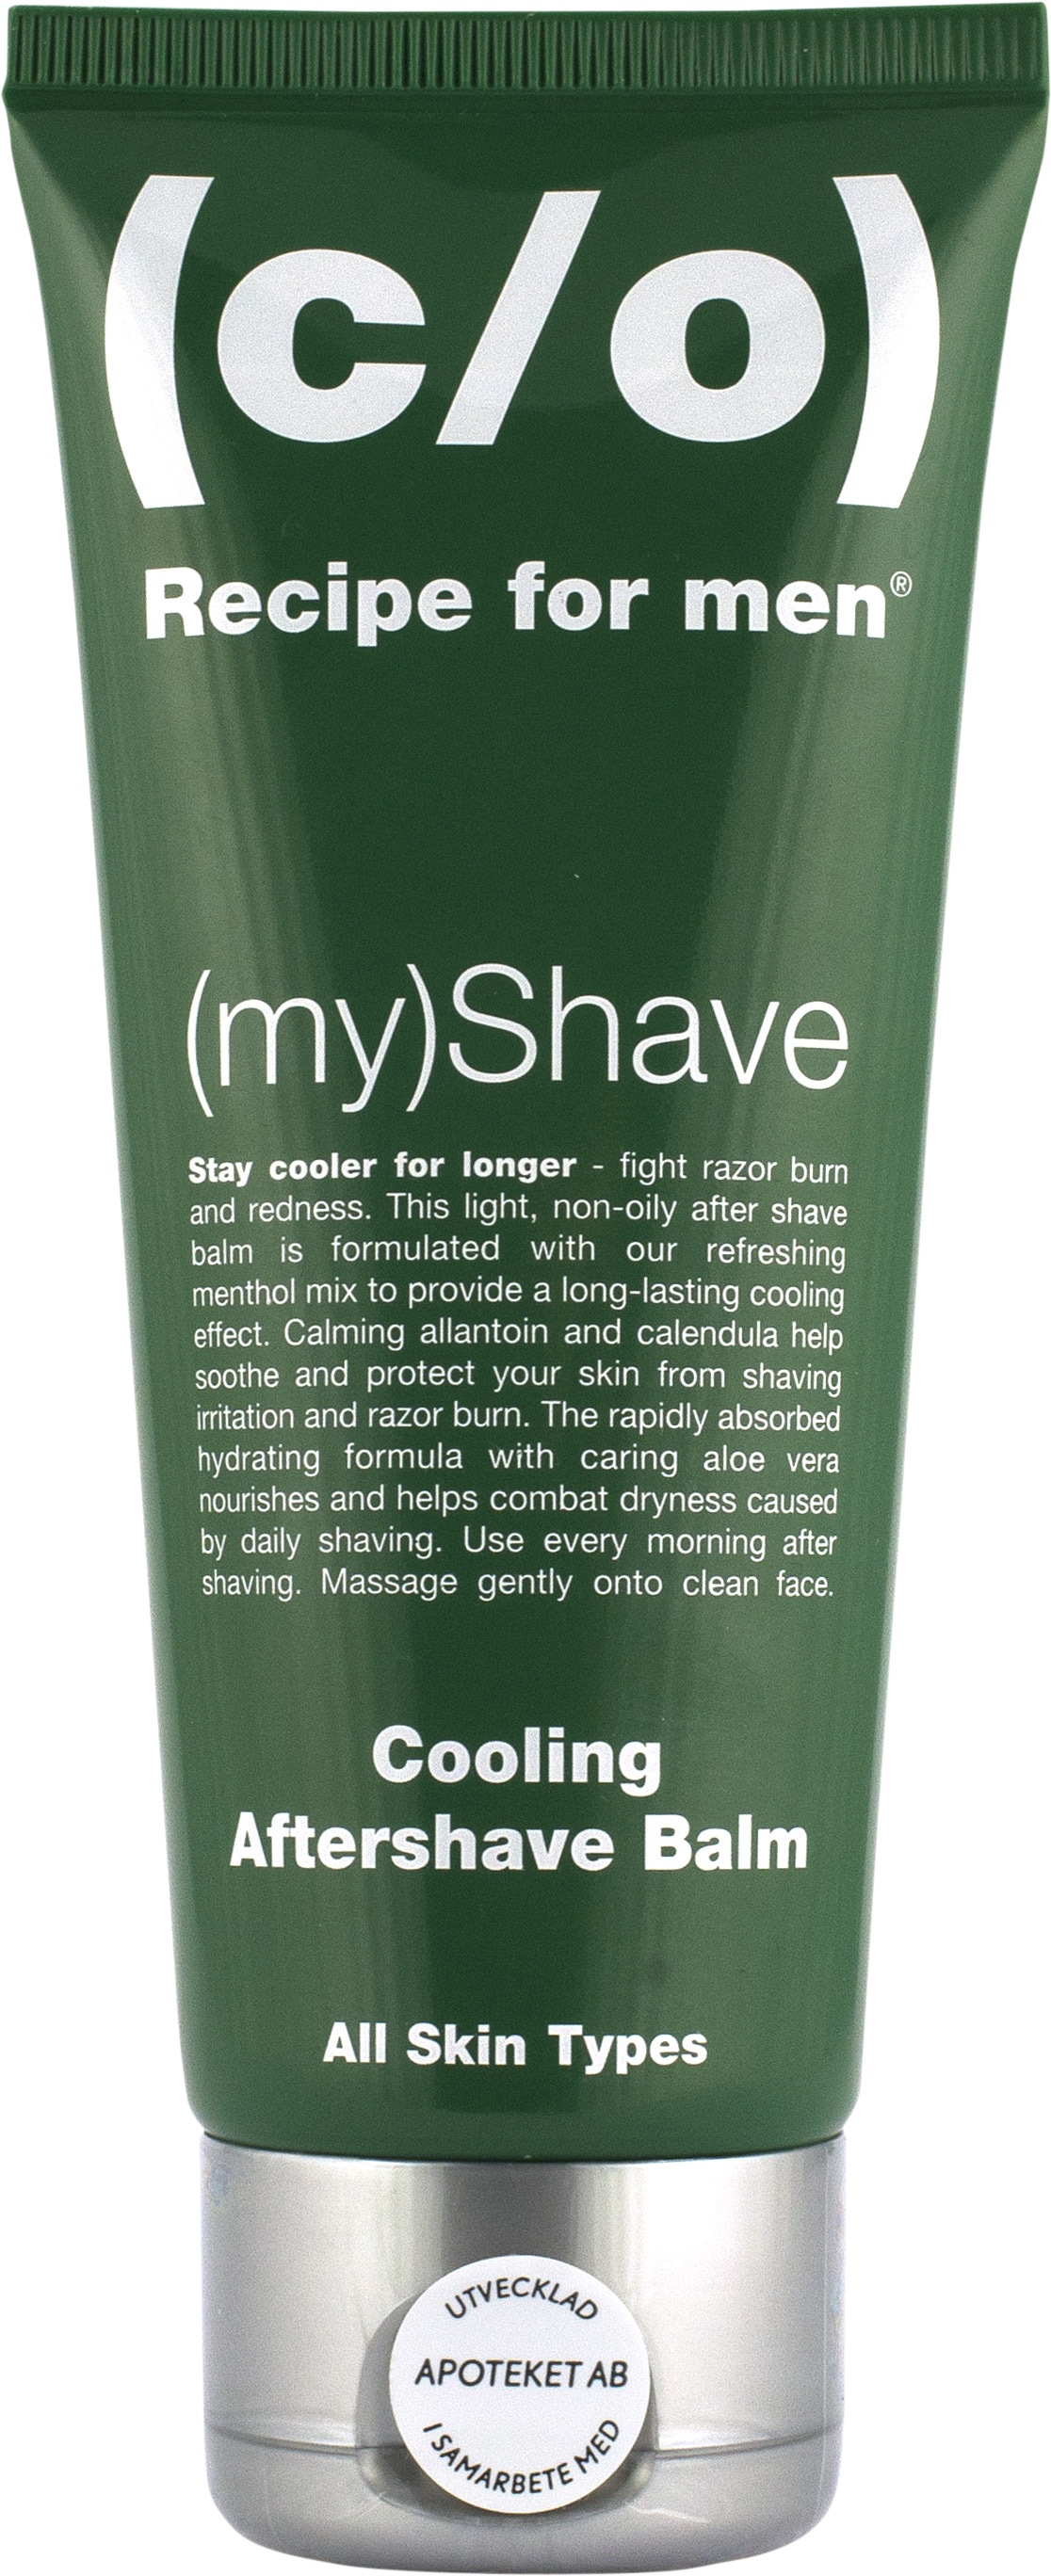 C/O Recipe for men Aftershave, Cooling Aftershave Balm, 100ml